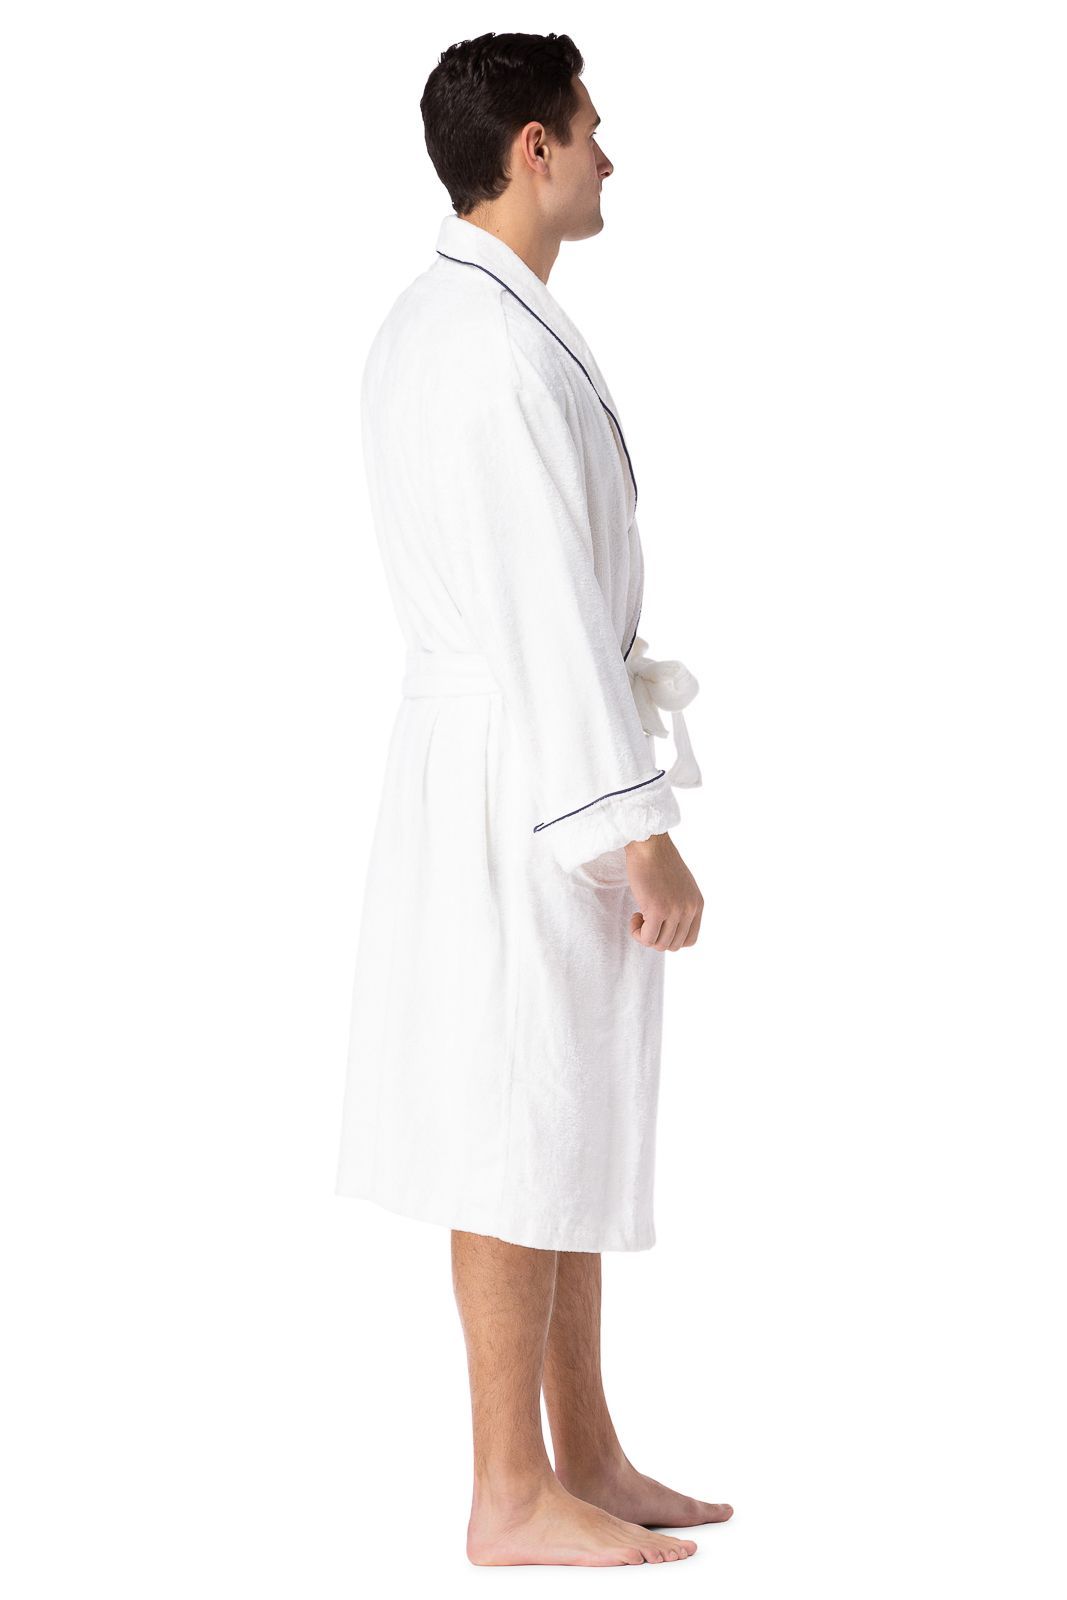 Spa Robe Terry Cloth - Spa Robes For Men